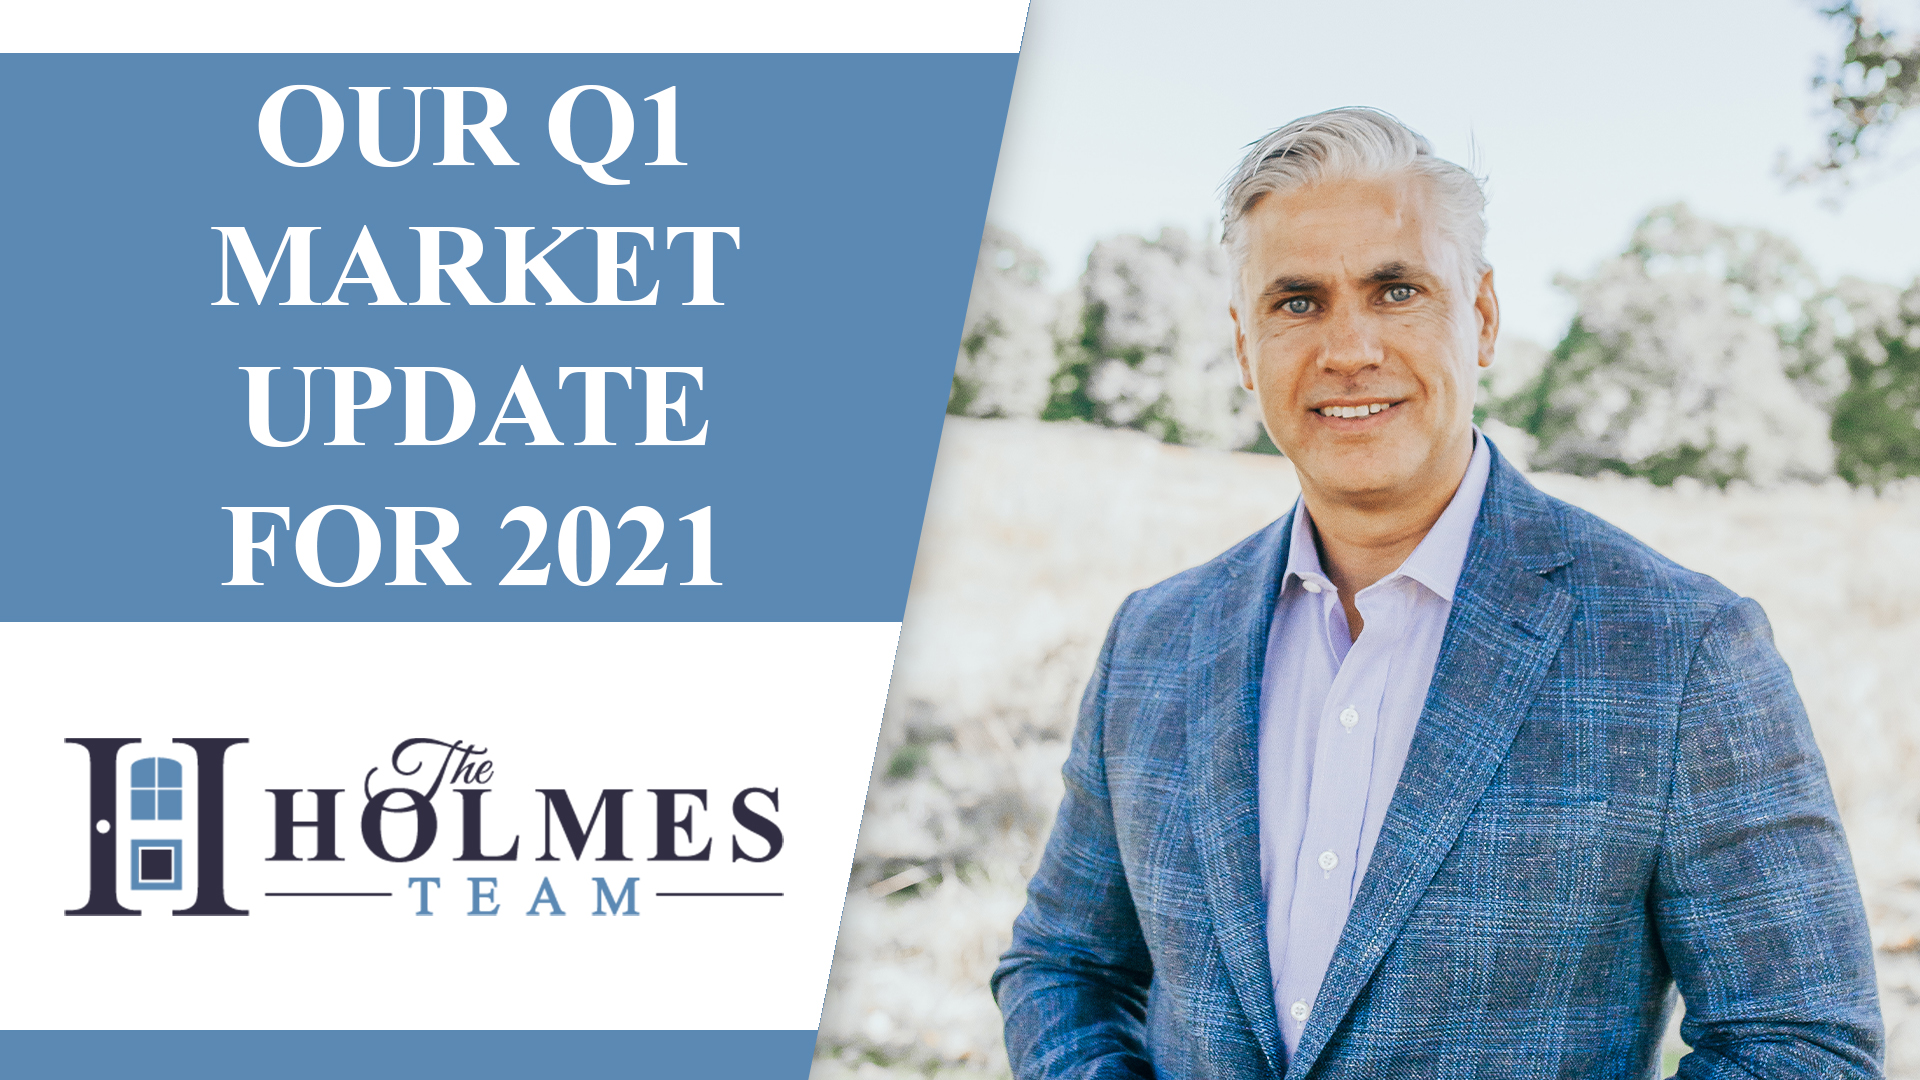 The Latest Update from Our Market